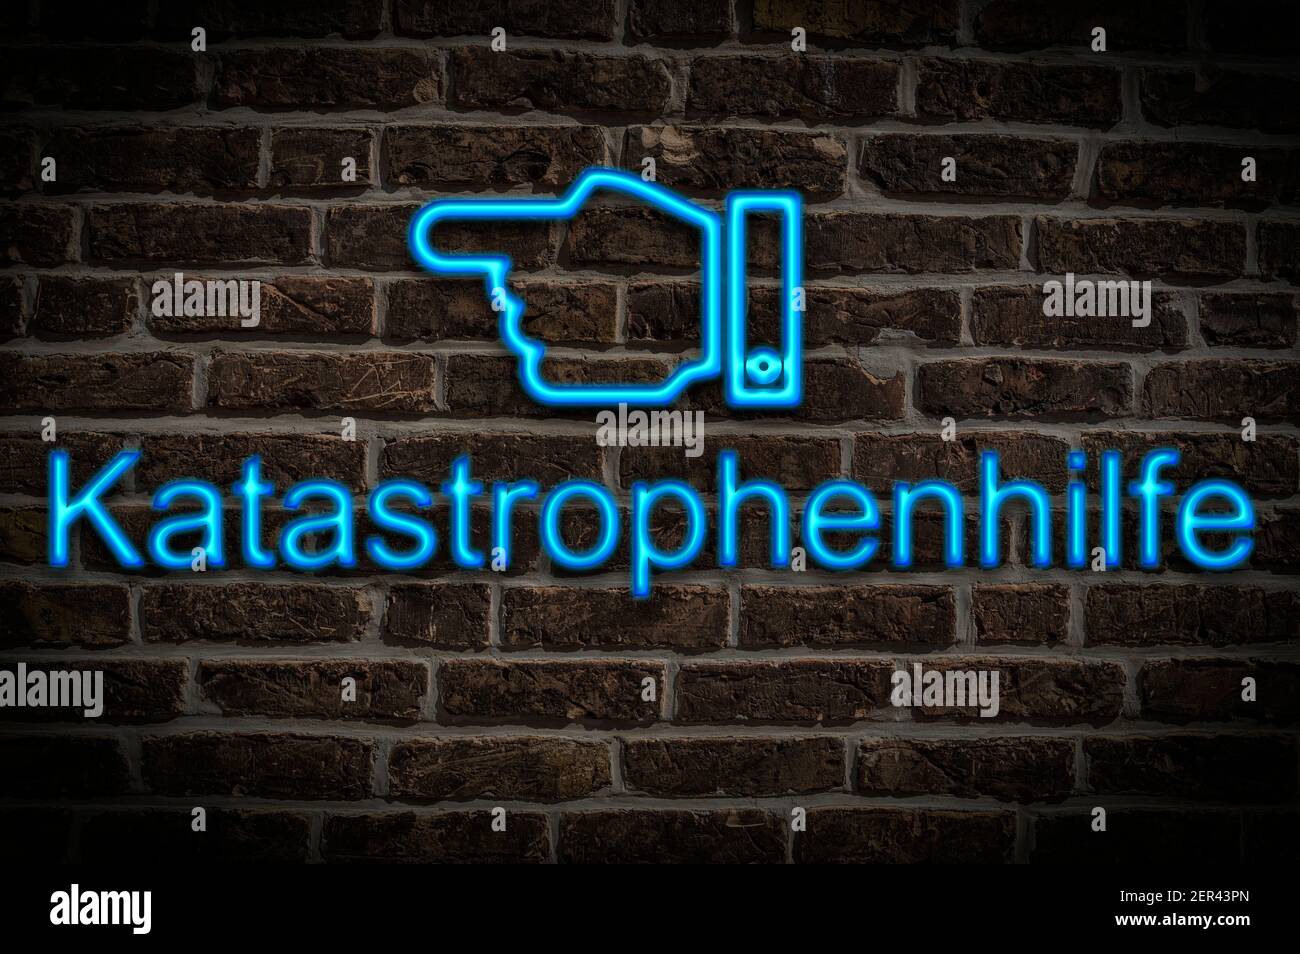 Detail photo of a neon sign on a wall with the inscription Katastrophenhilfe (Emergency relief) Stock Photo